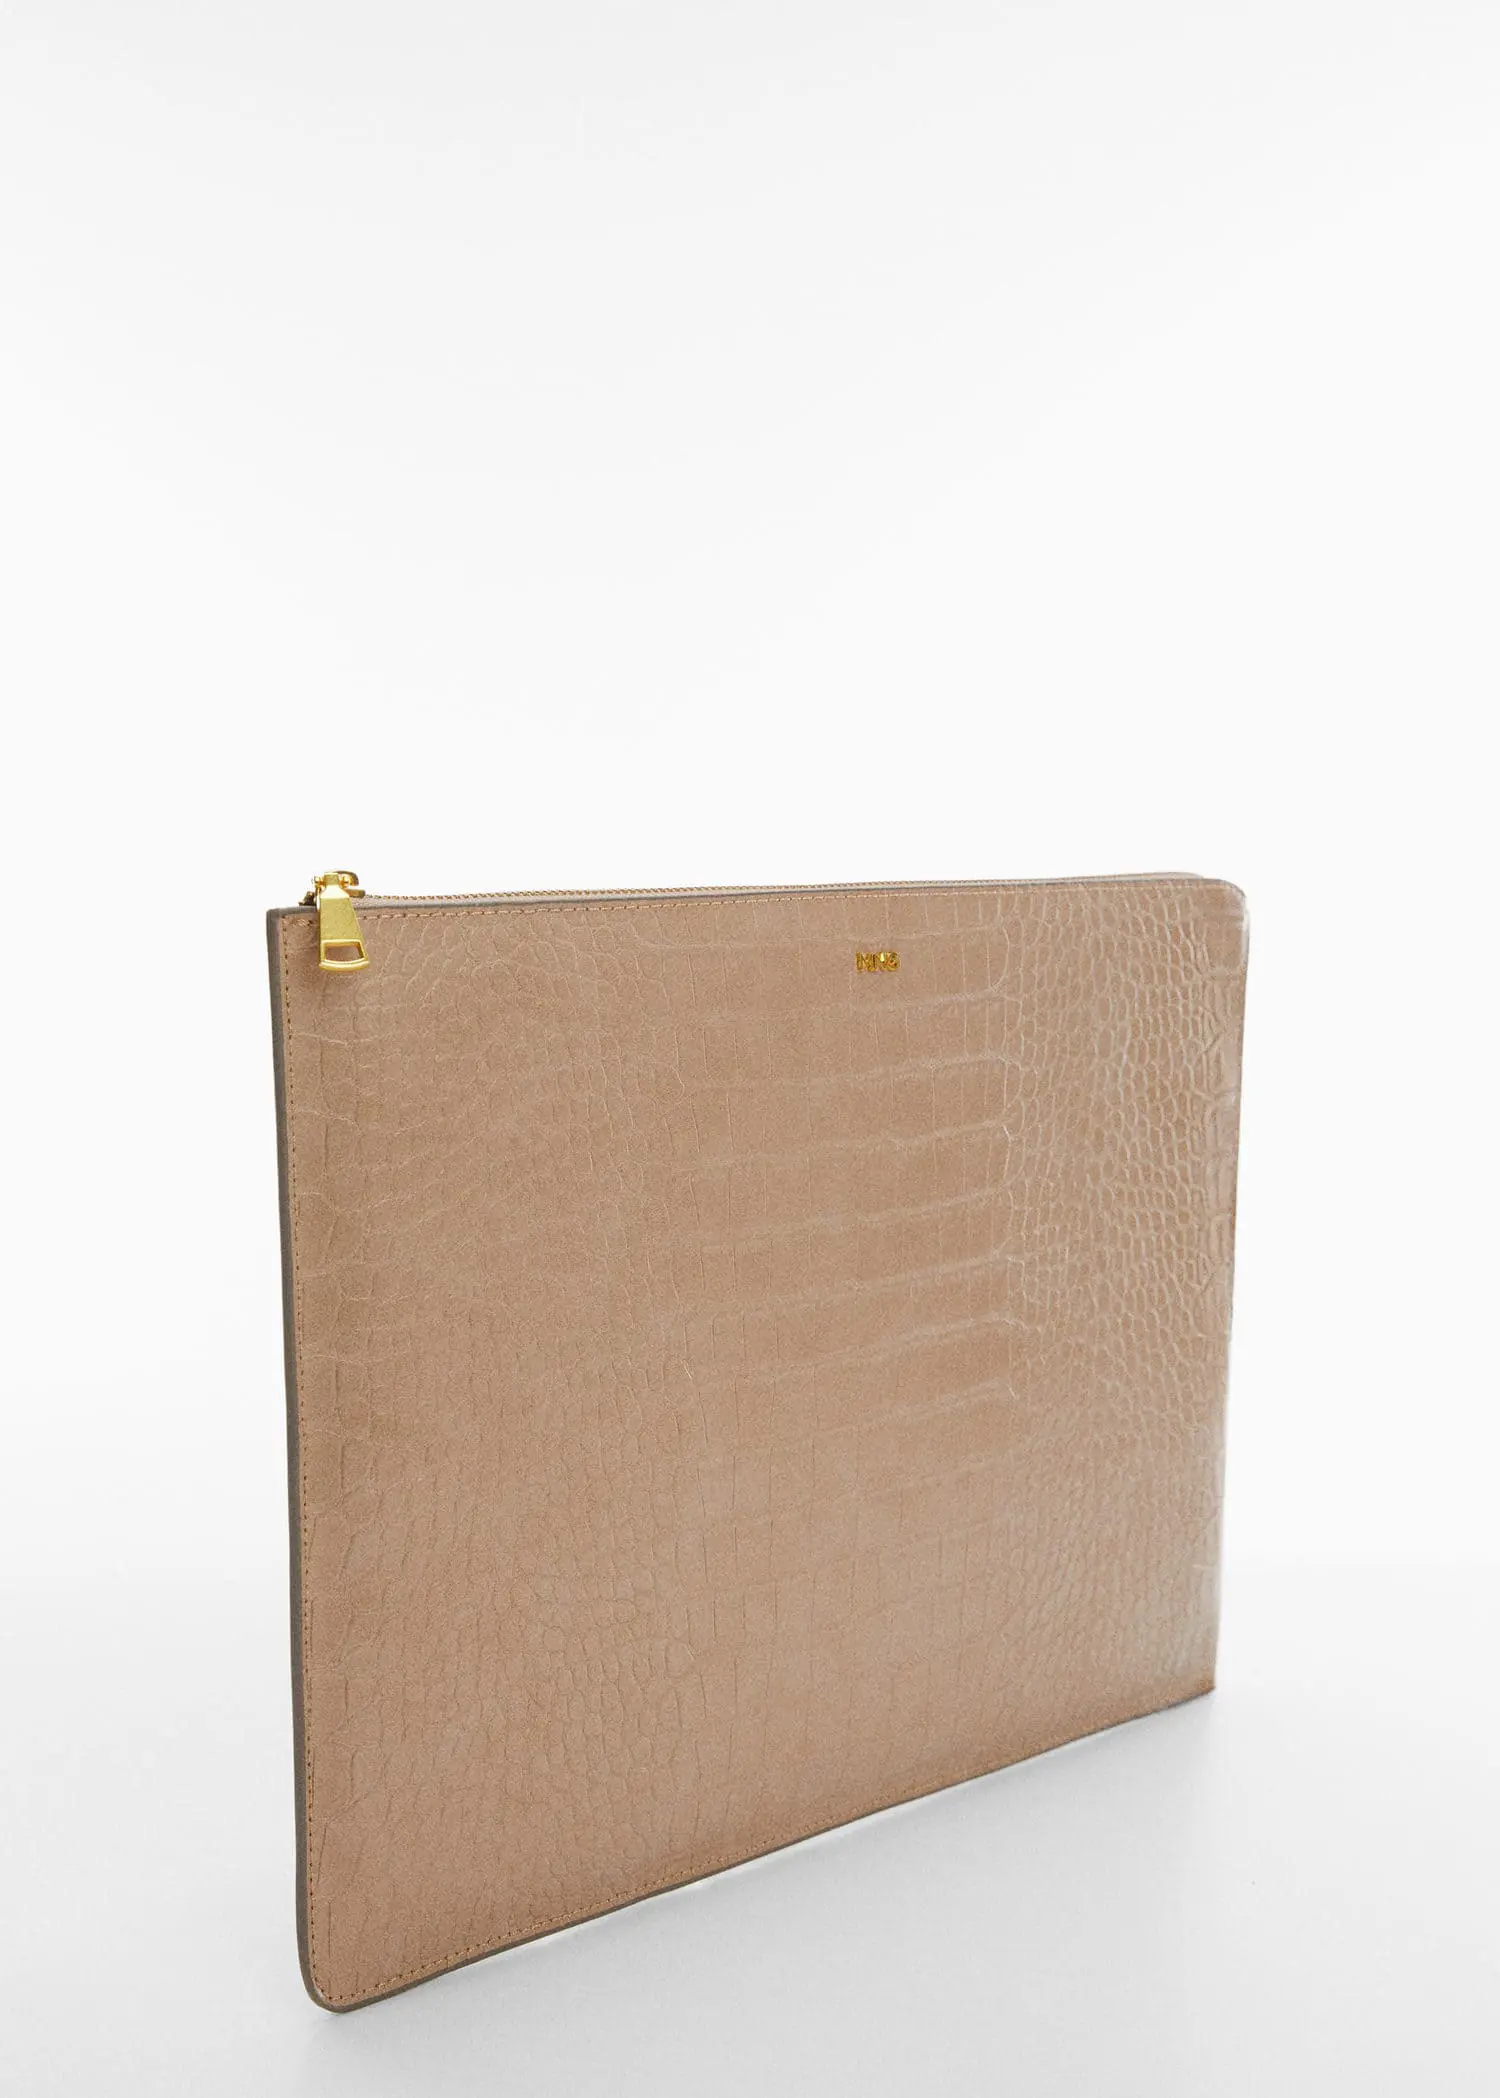 Mango Coco laptop case. a brown leather case sitting on top of a white table. 